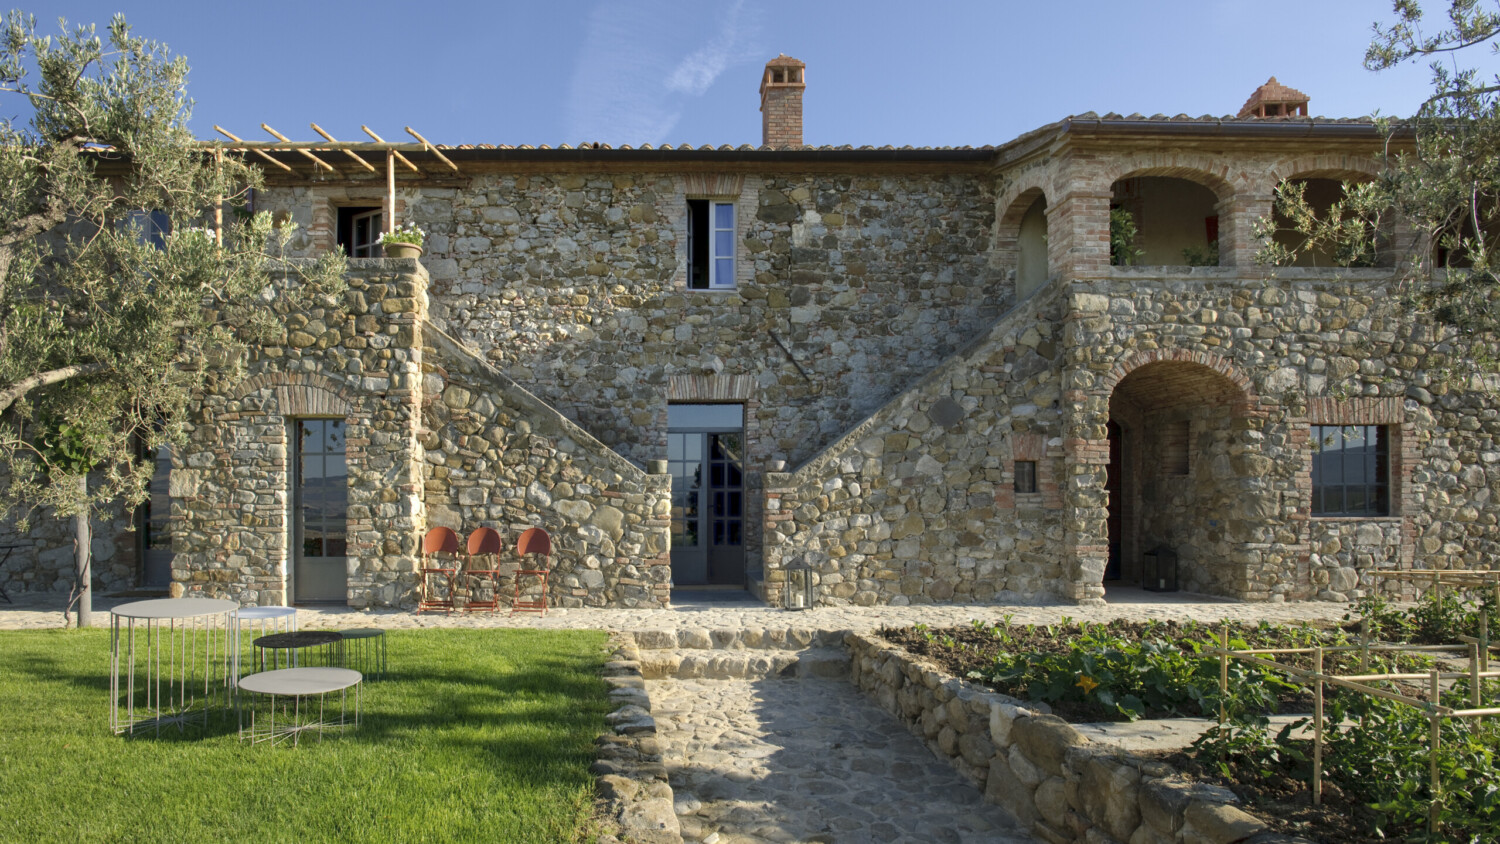 Join Mike Kelley and doublespace in Tuscany